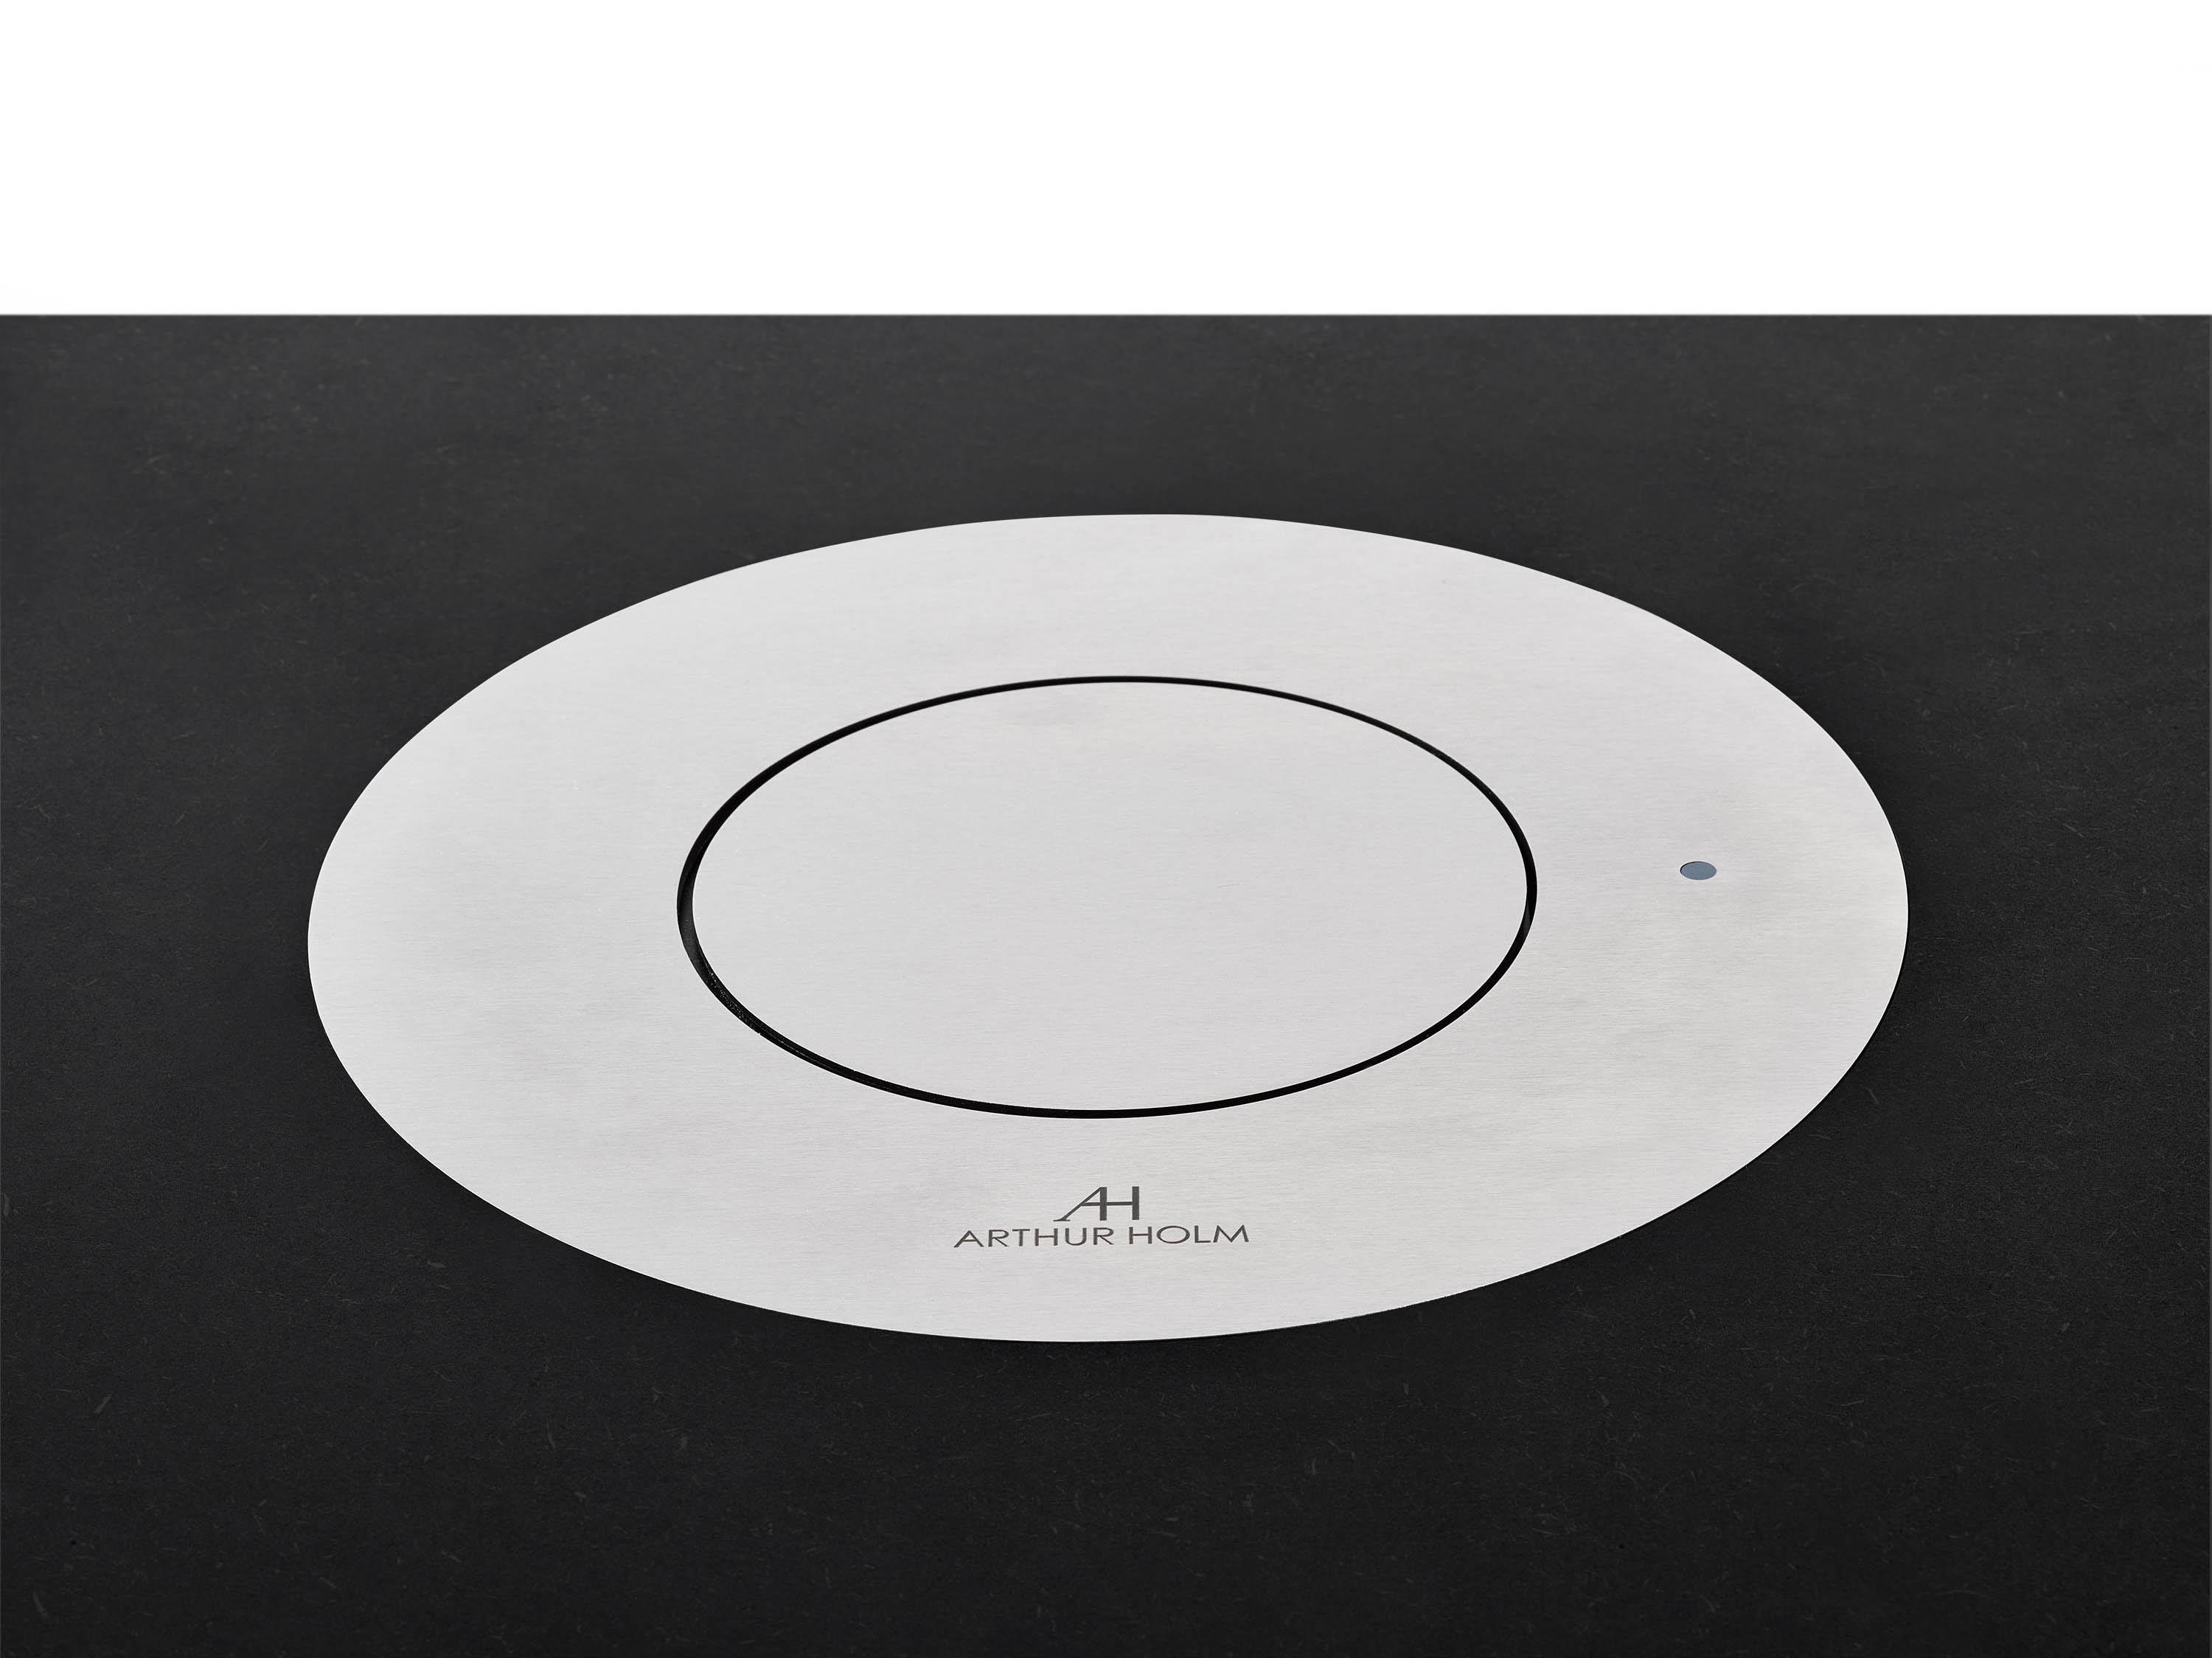 DynamicSpeaker - High quality designer products | Architonic